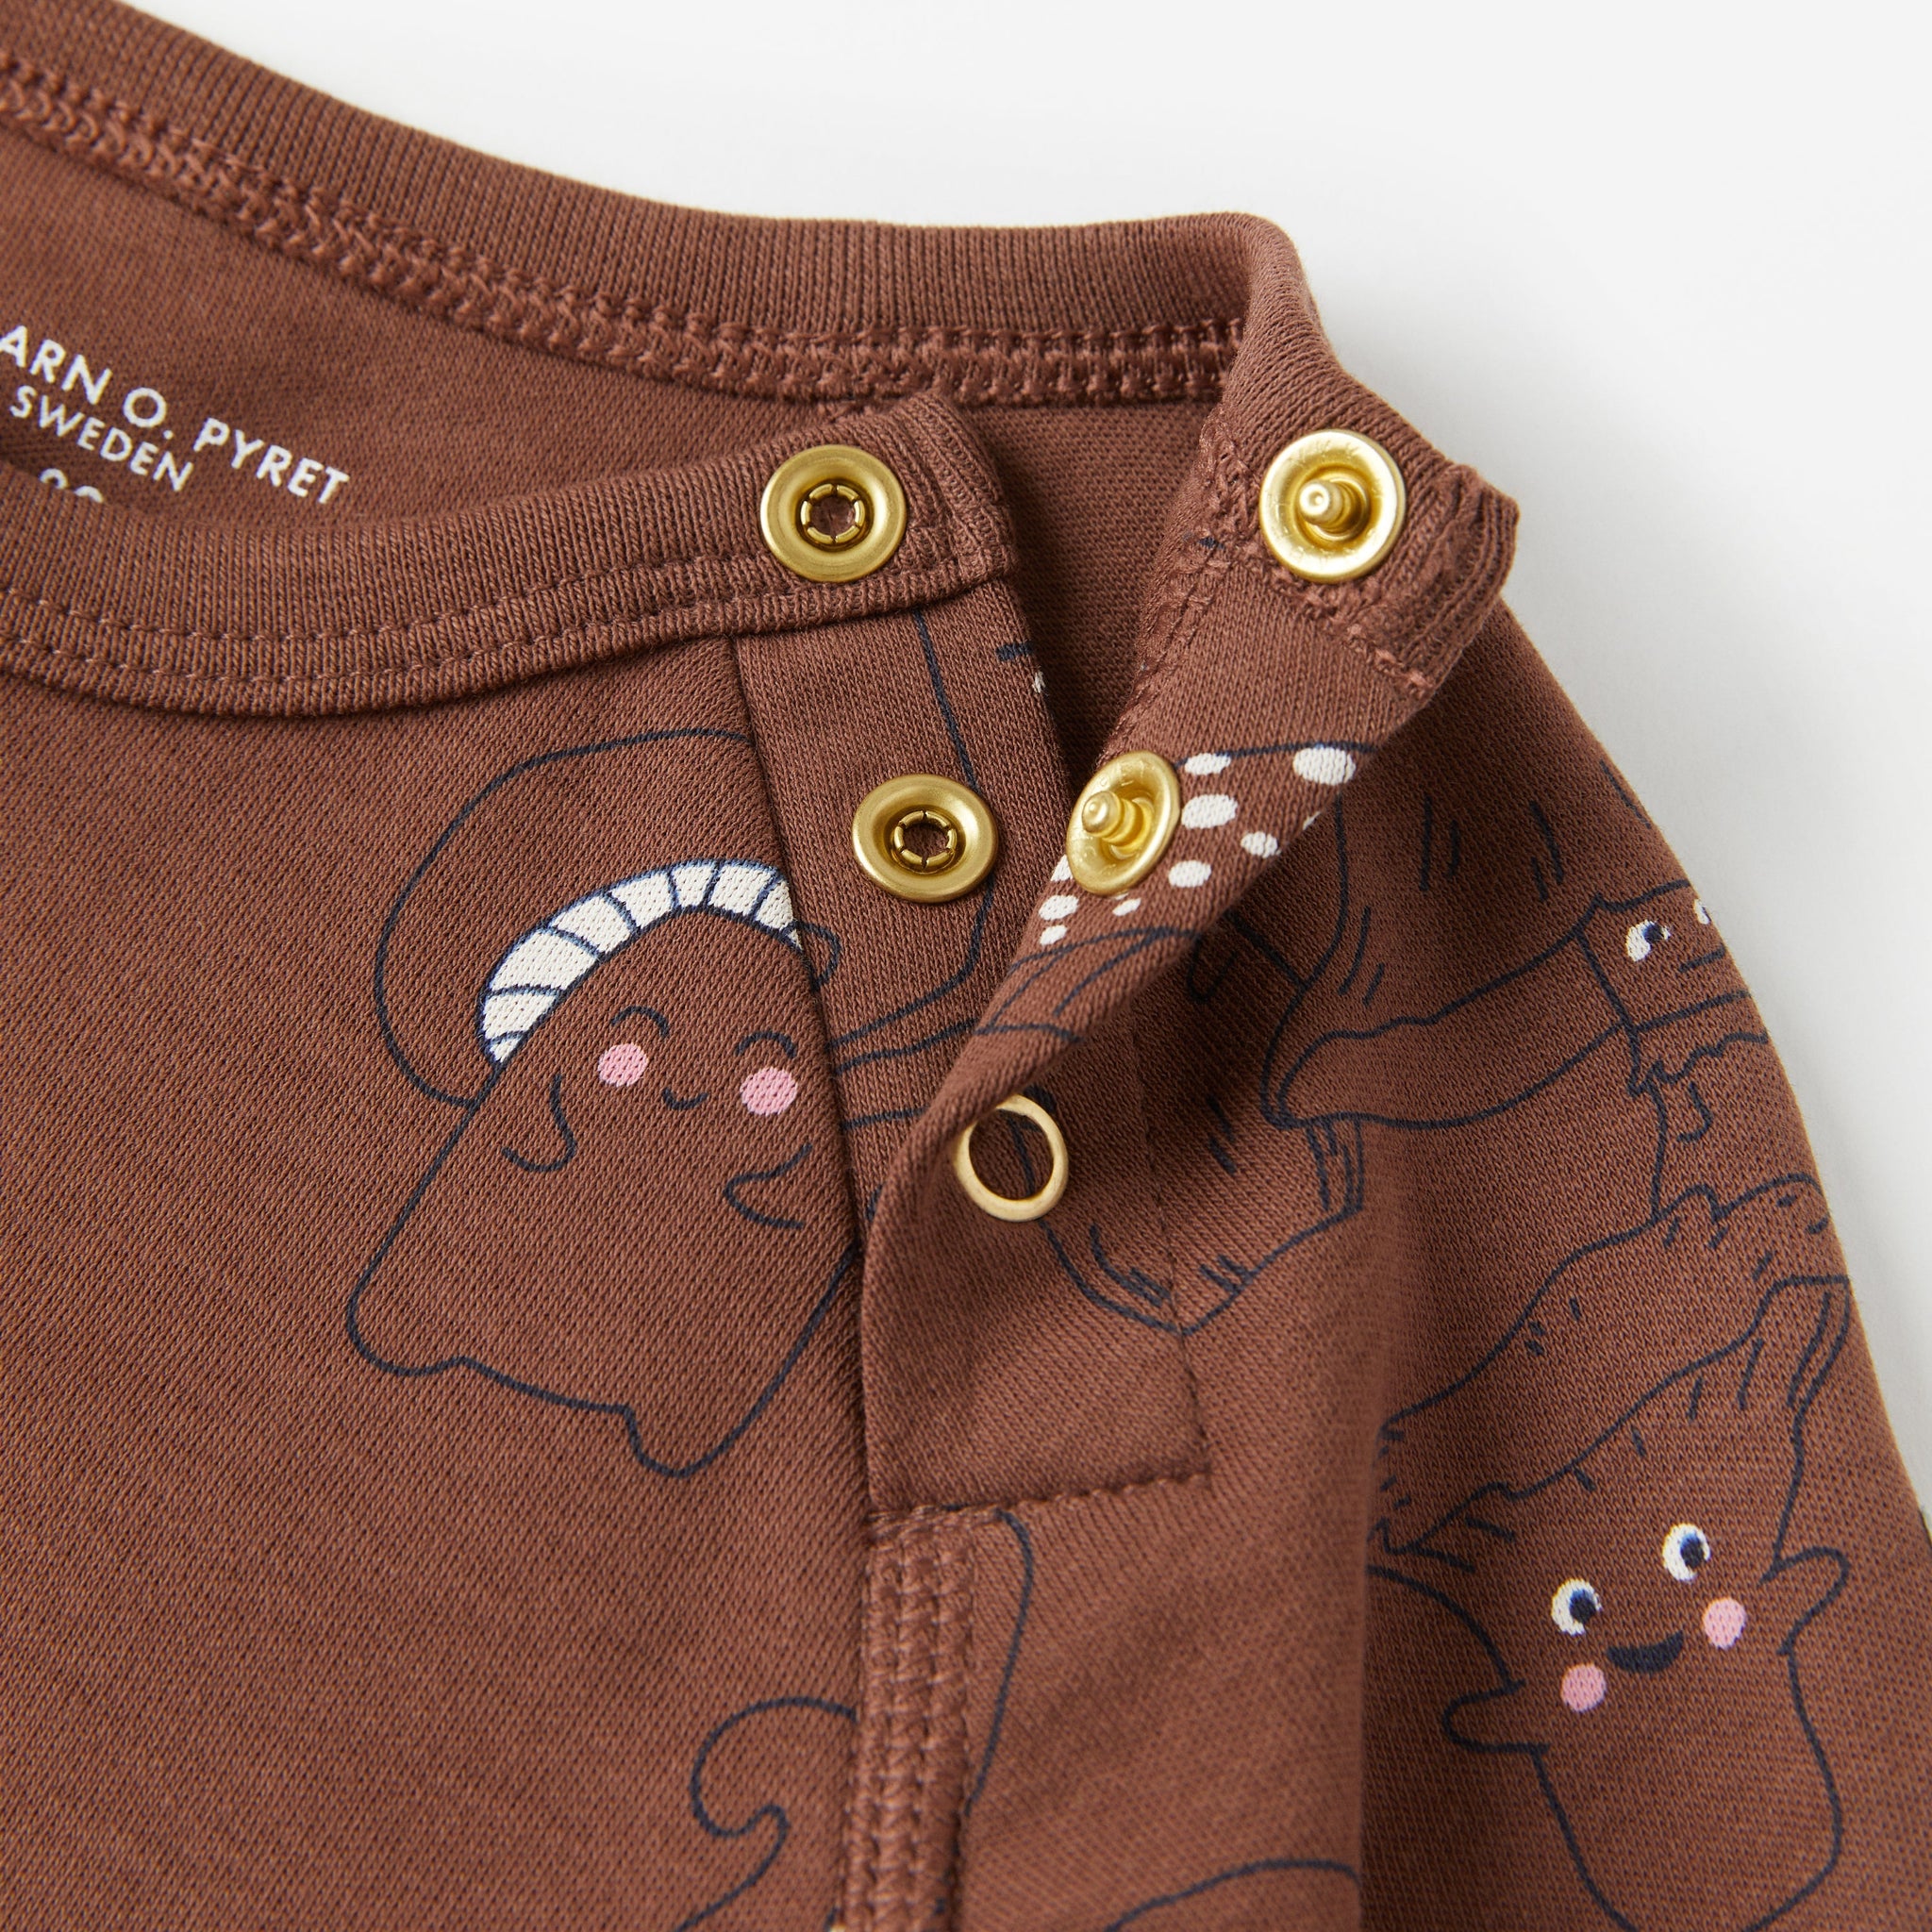 Brown Organic Cotton Babygrow from the Polarn O. Pyret babywear collection. Nordic baby clothes made from sustainable sources.